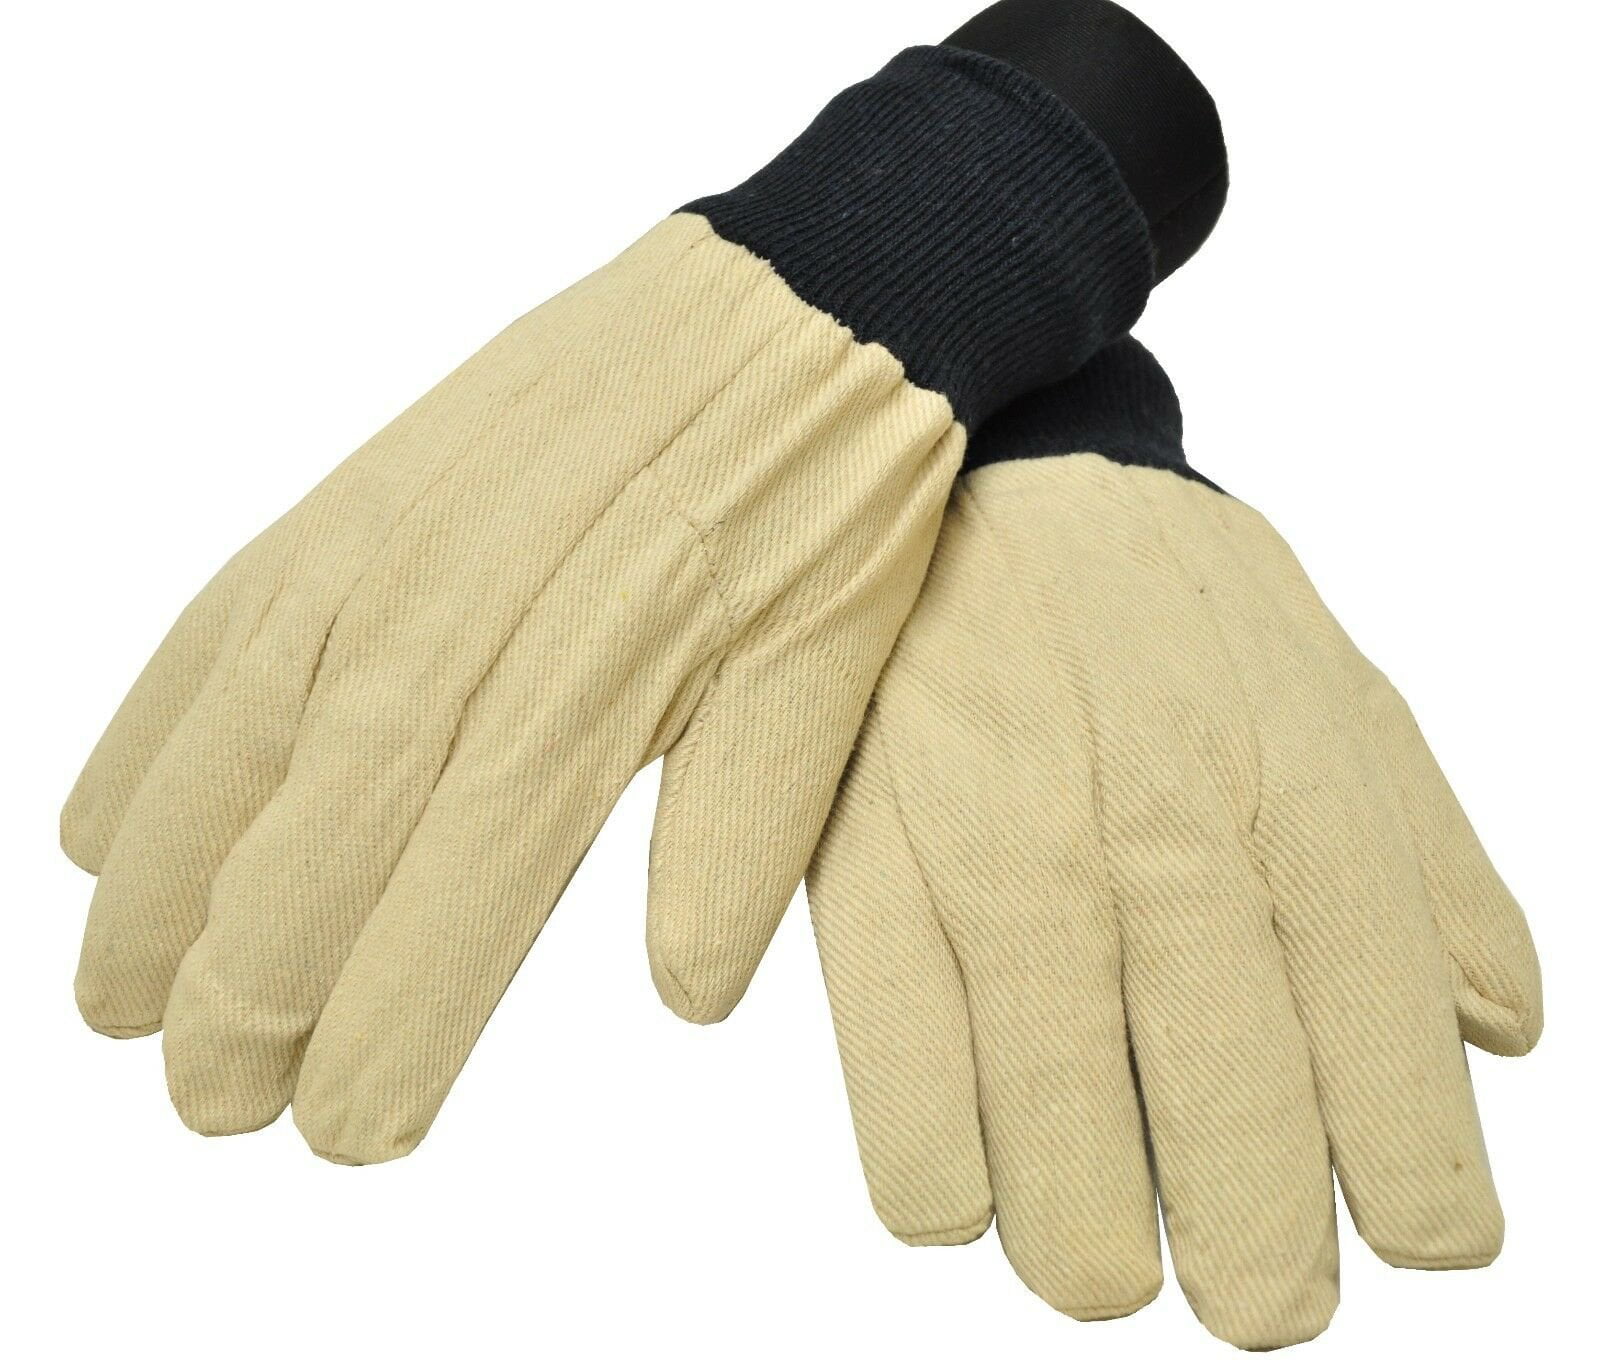 Two Pairs For £10.99 Riders Trend Gloves Black Nubuck Thinsulate Size Med 